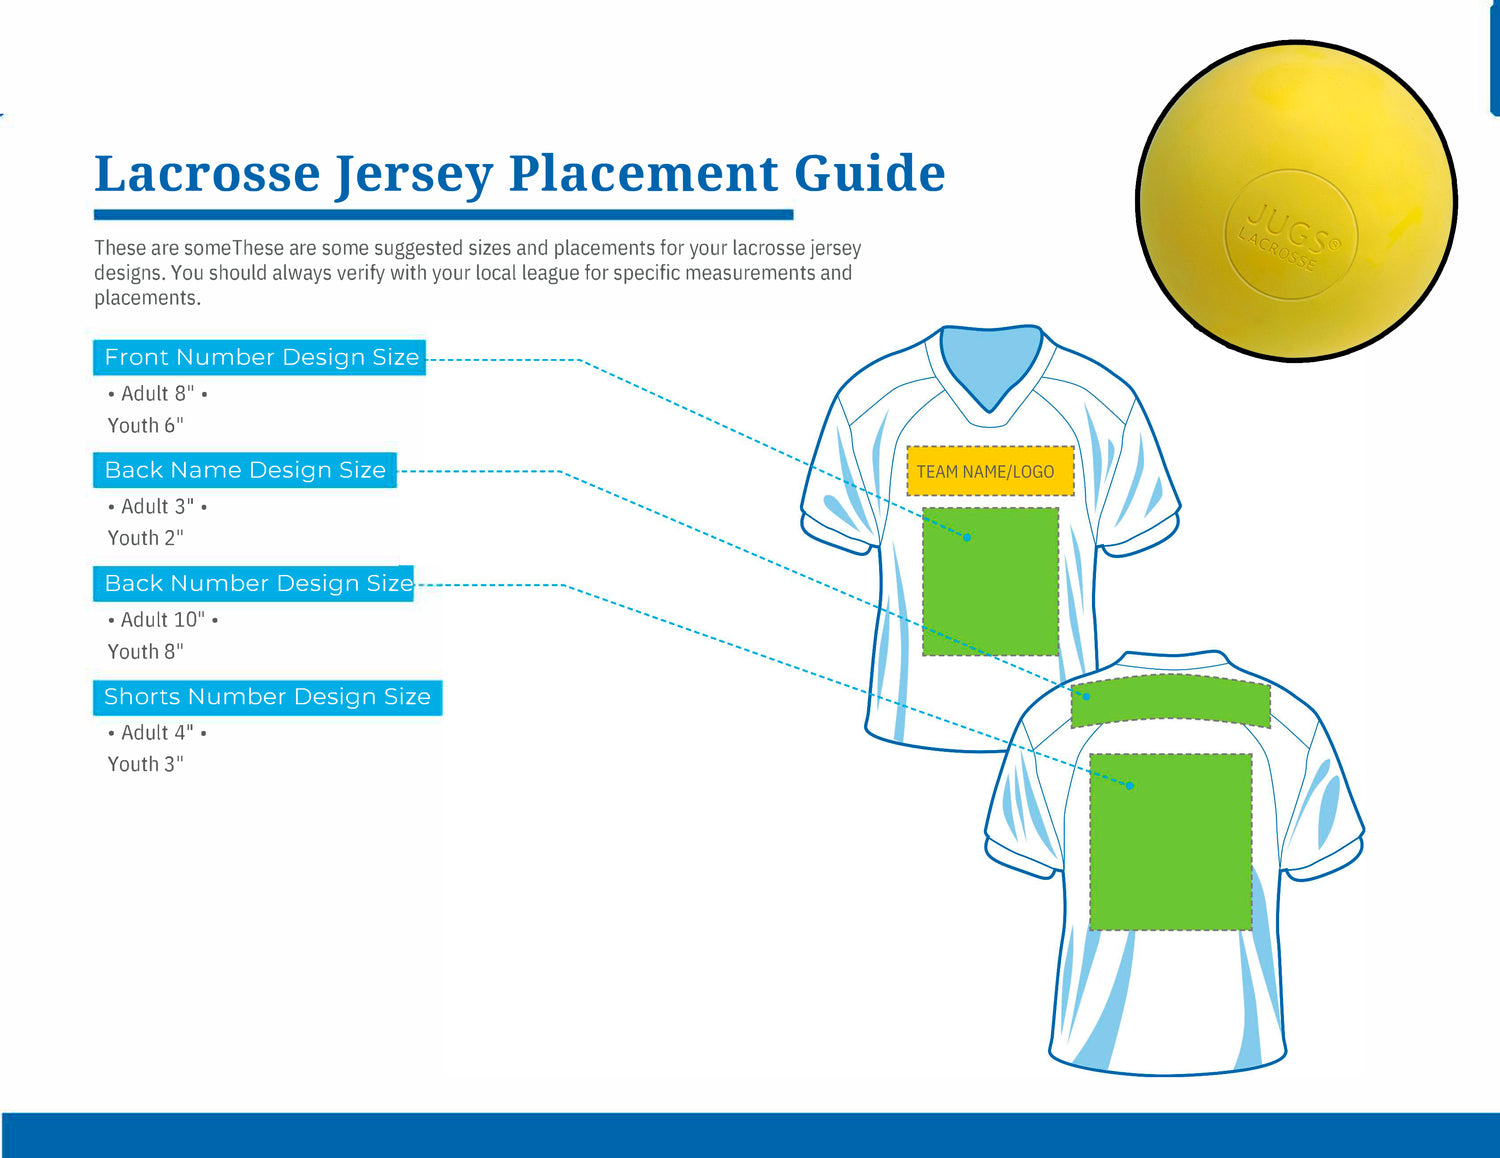 Lacrosse jersey DTF transfer placement guide